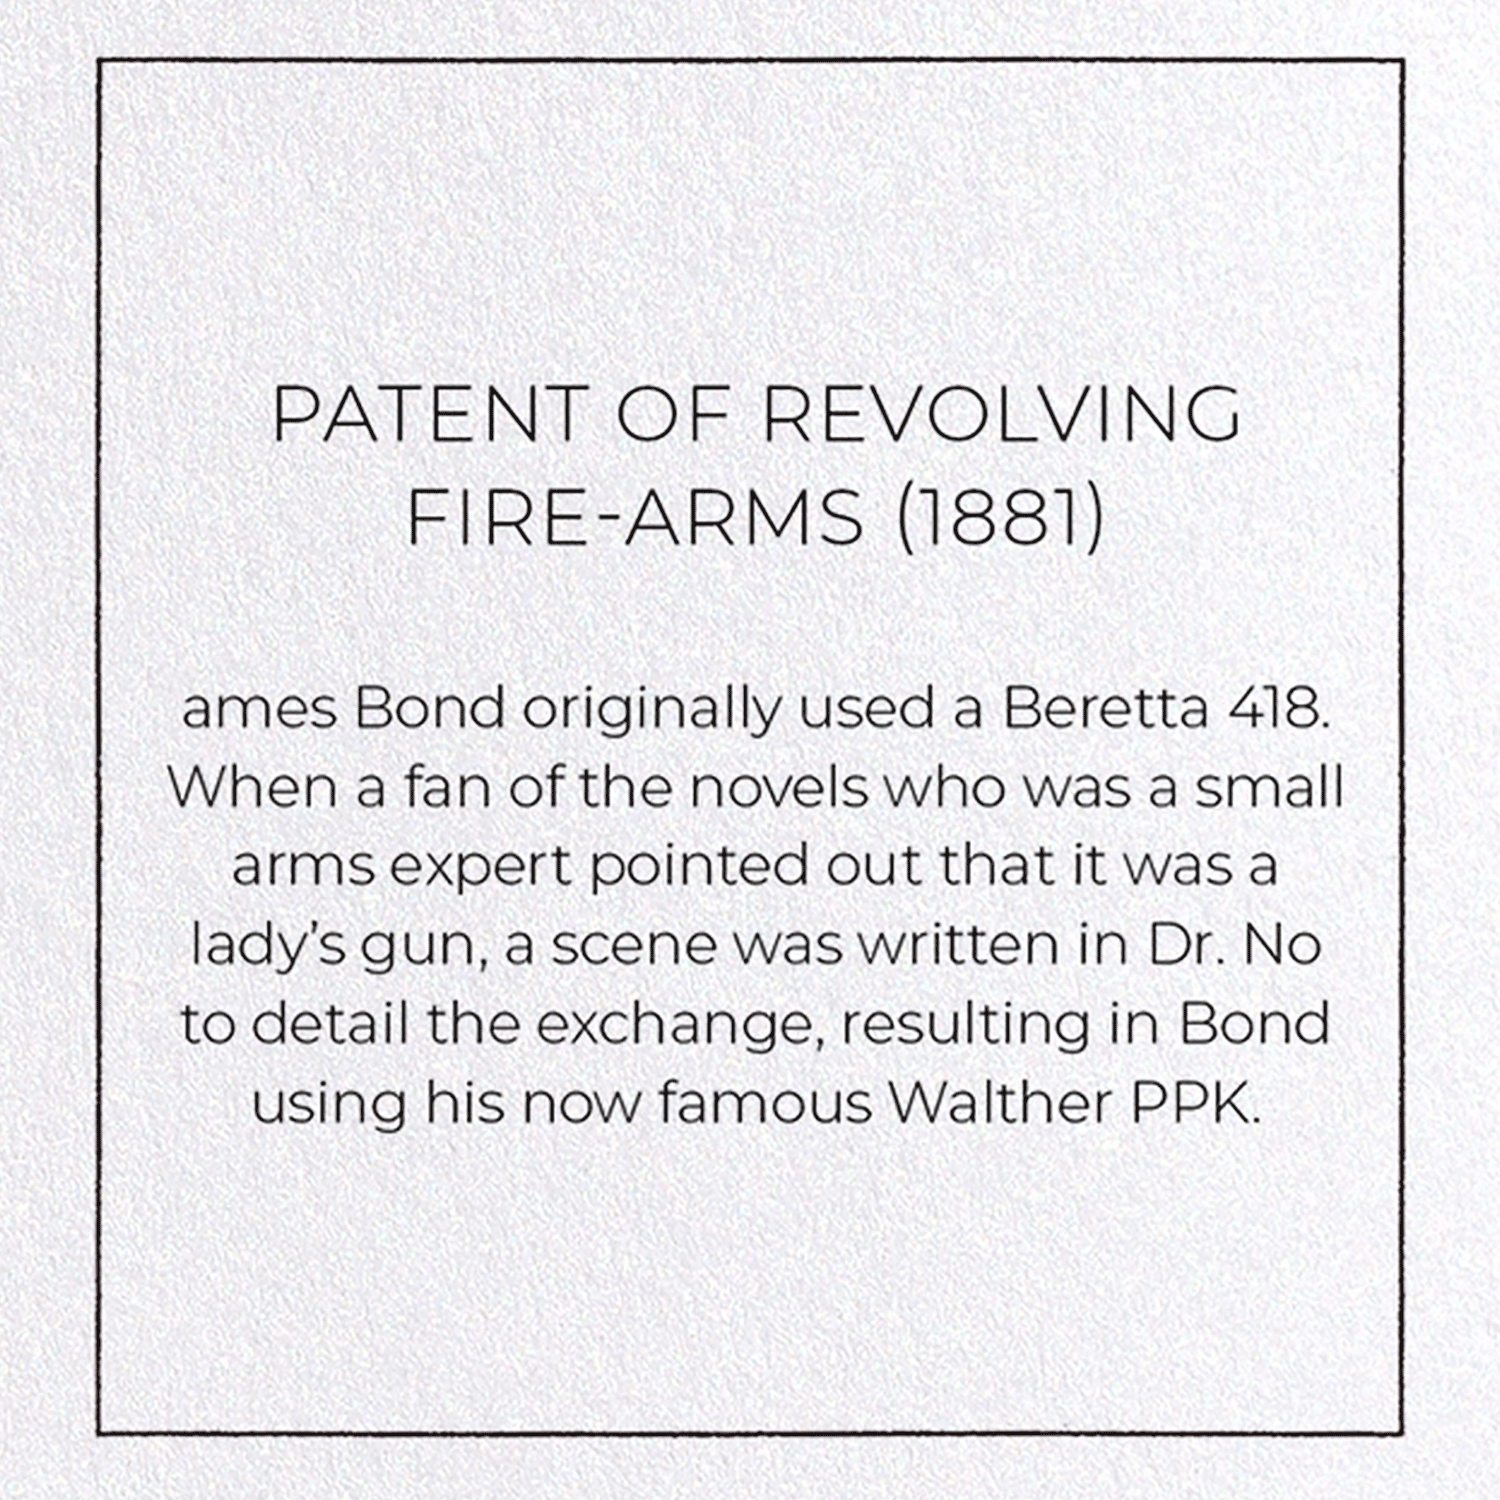 PATENT OF REVOLVING FIRE-ARMS (1881)